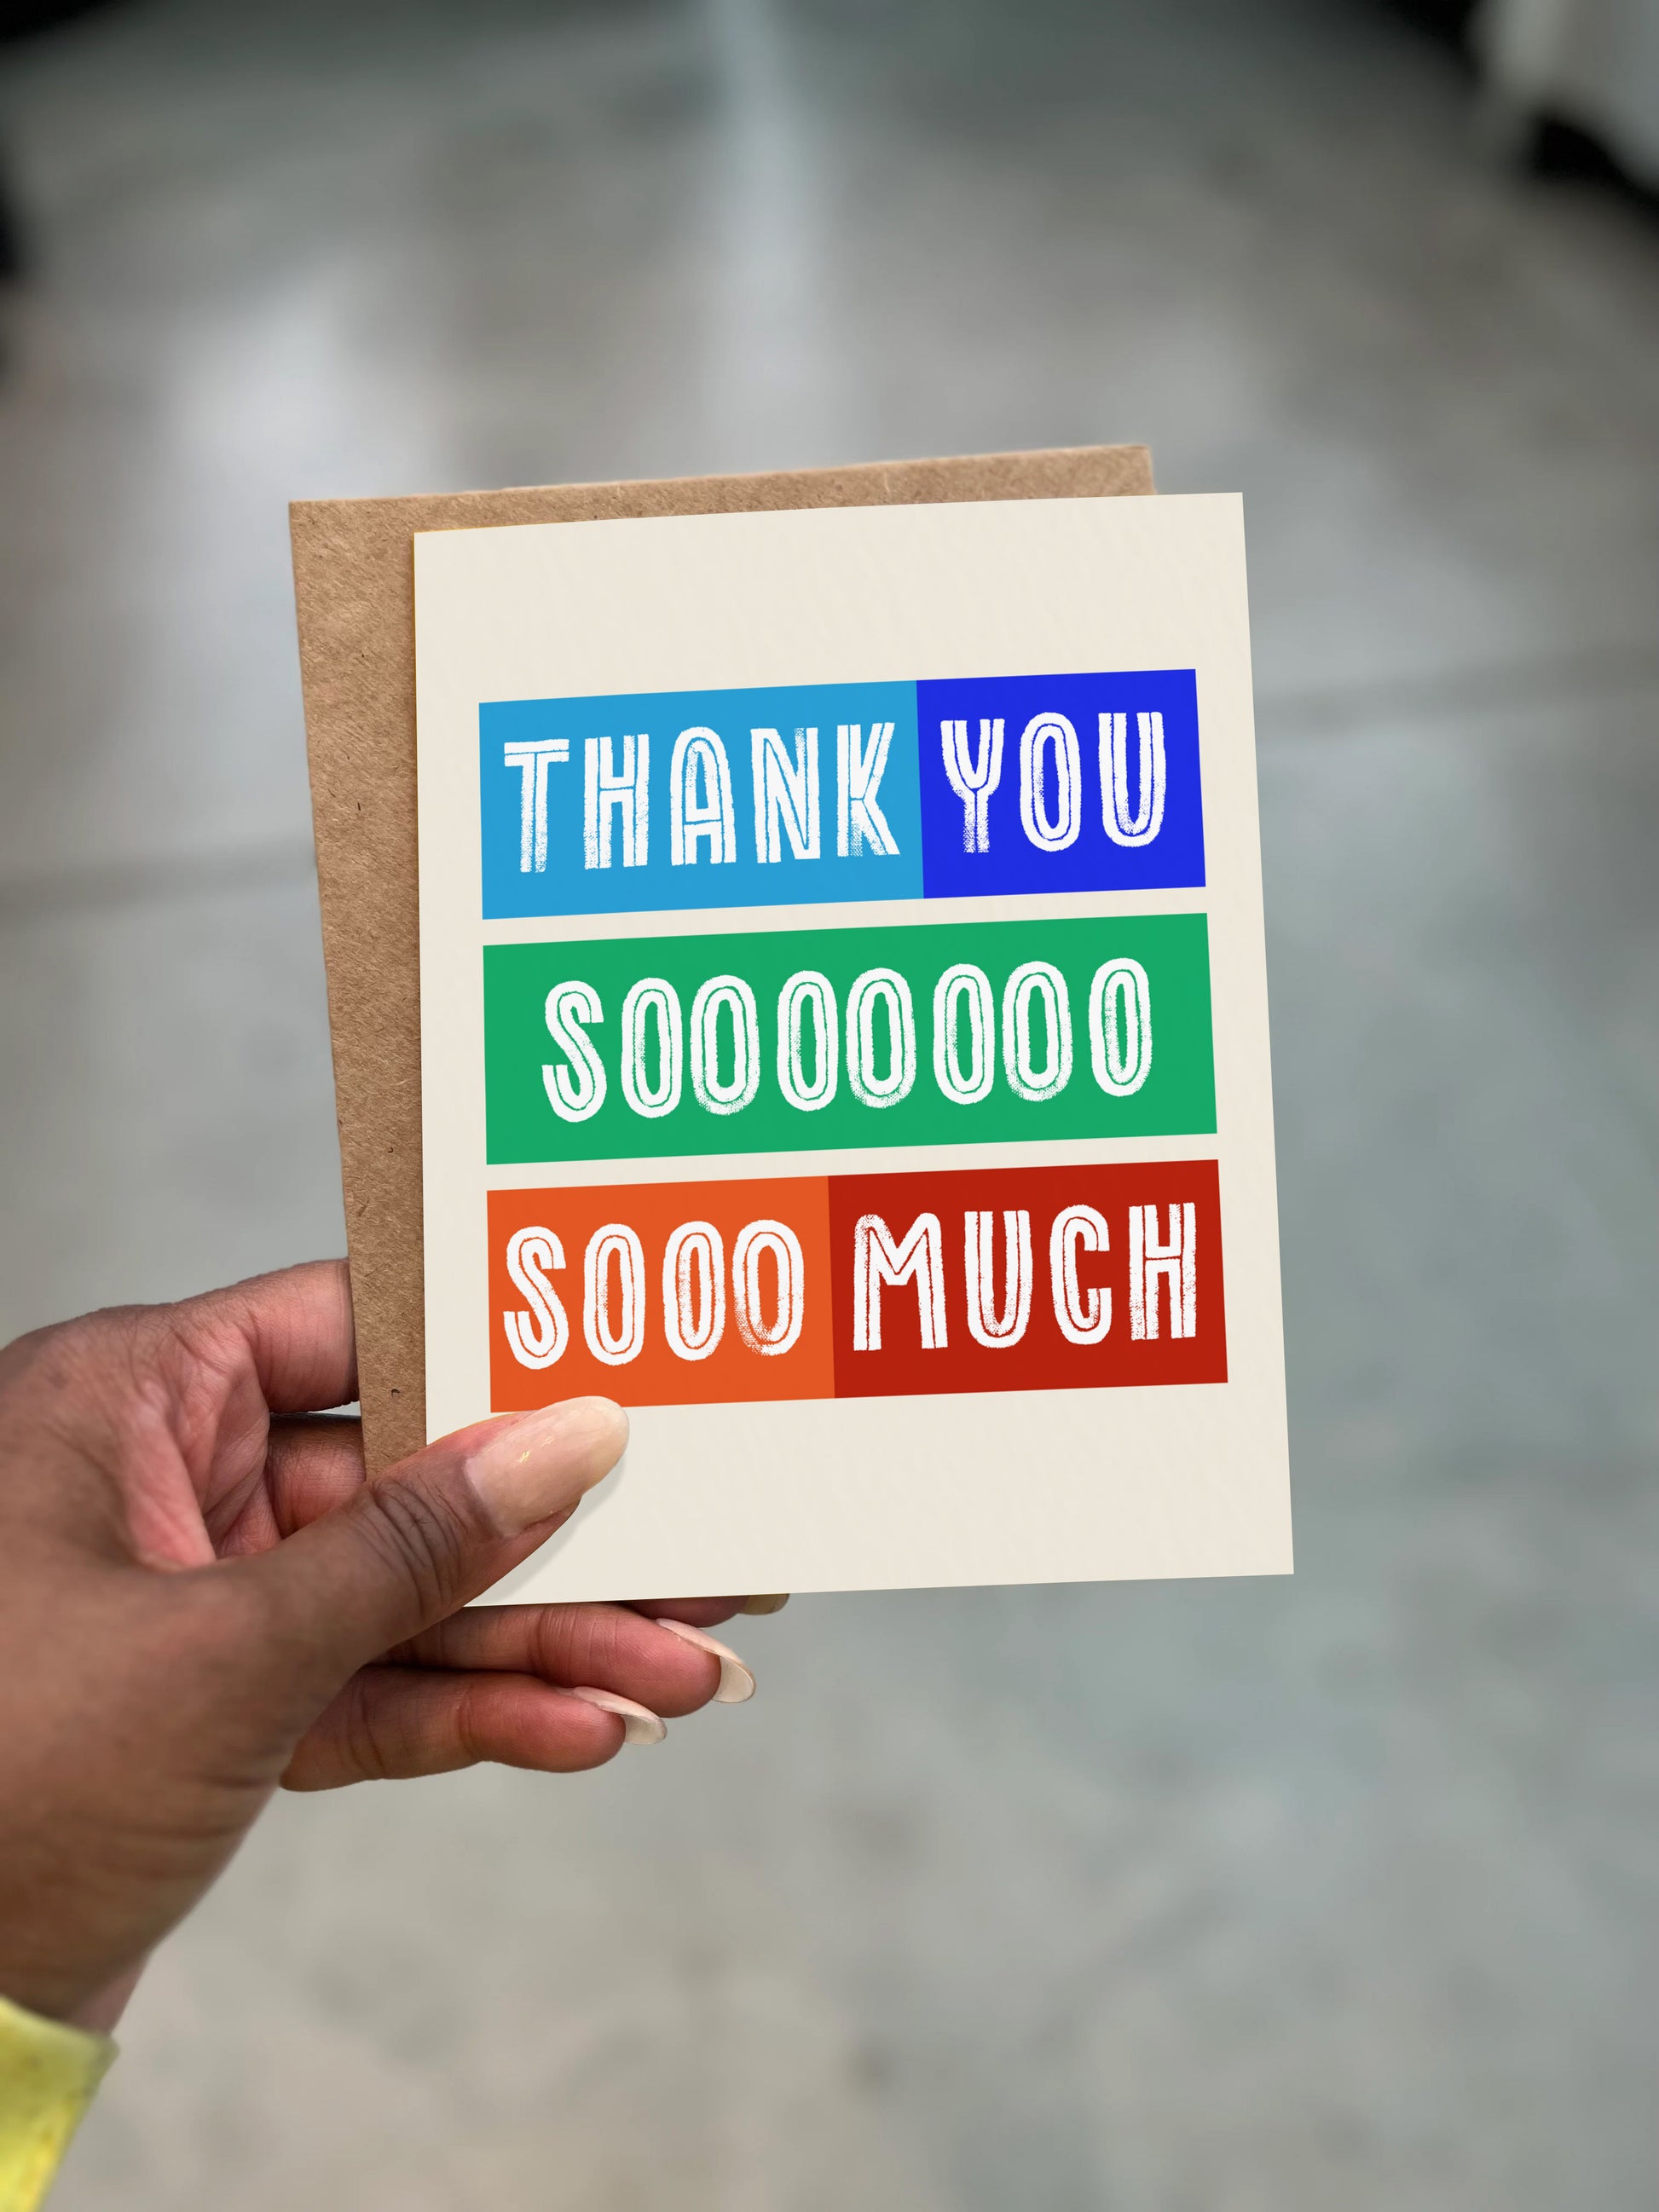 Thank You So Much 4.25x5.5” A2, celebrate, thank you, pop culture, greeting card from Goods Made By Digitrillnana, Ashley Fletcher. Black Woman Owned. Perfect everyday card to say Thanks! Eco-friendly recycled cards. 